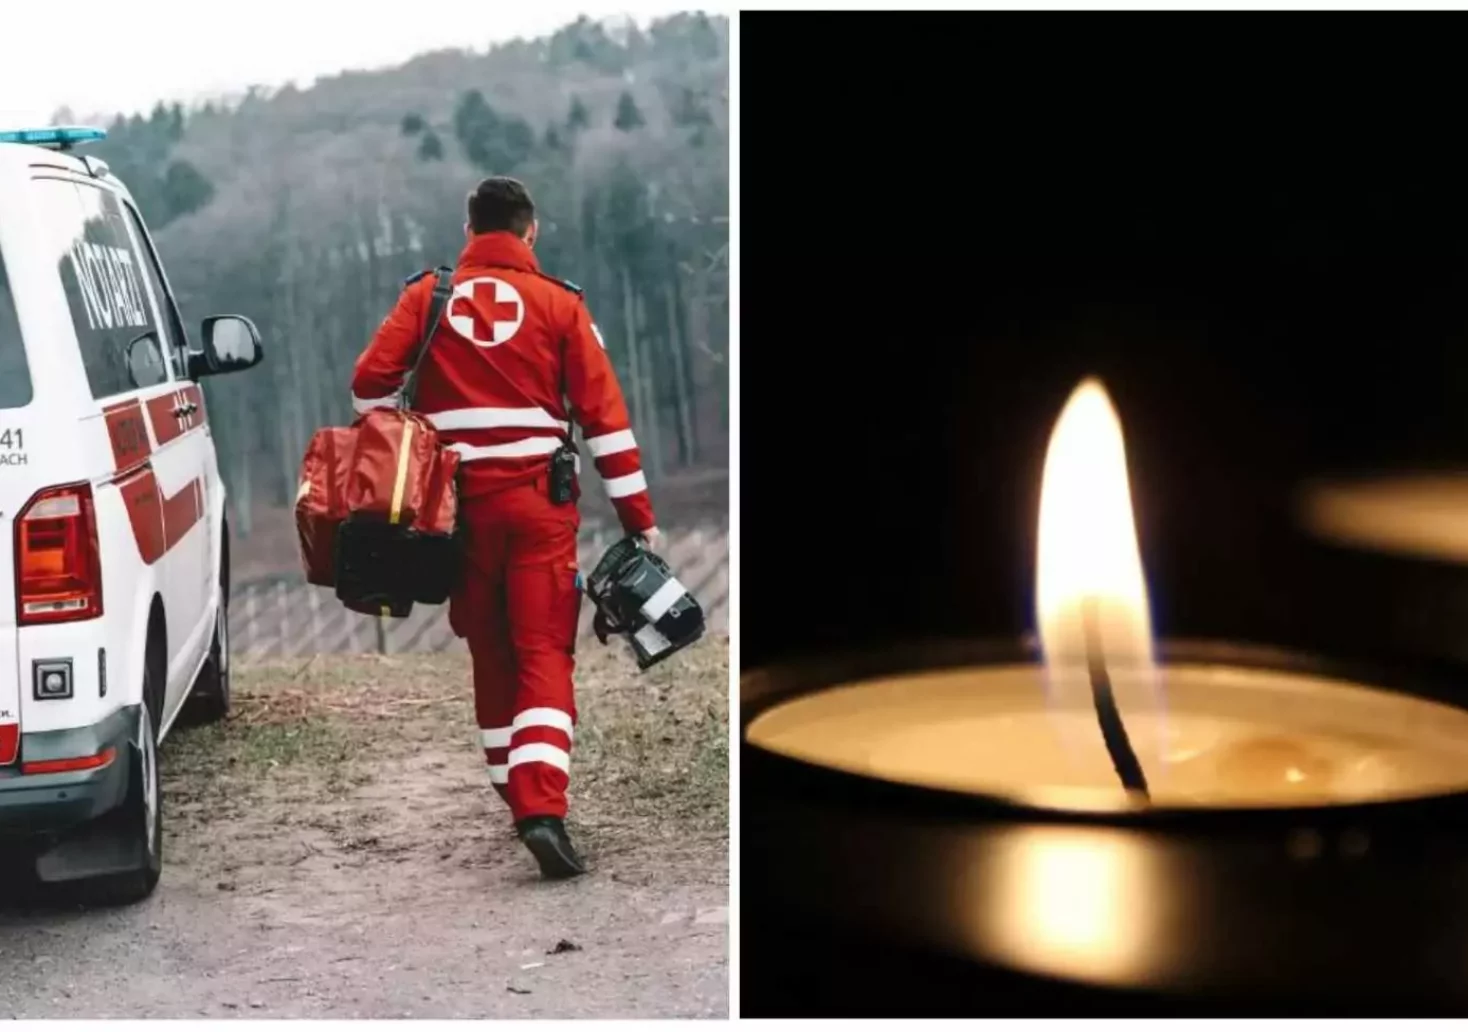 Photo in the article by 5min.at: You can see a paramedic walking towards the rescue car and candles because someone has died.